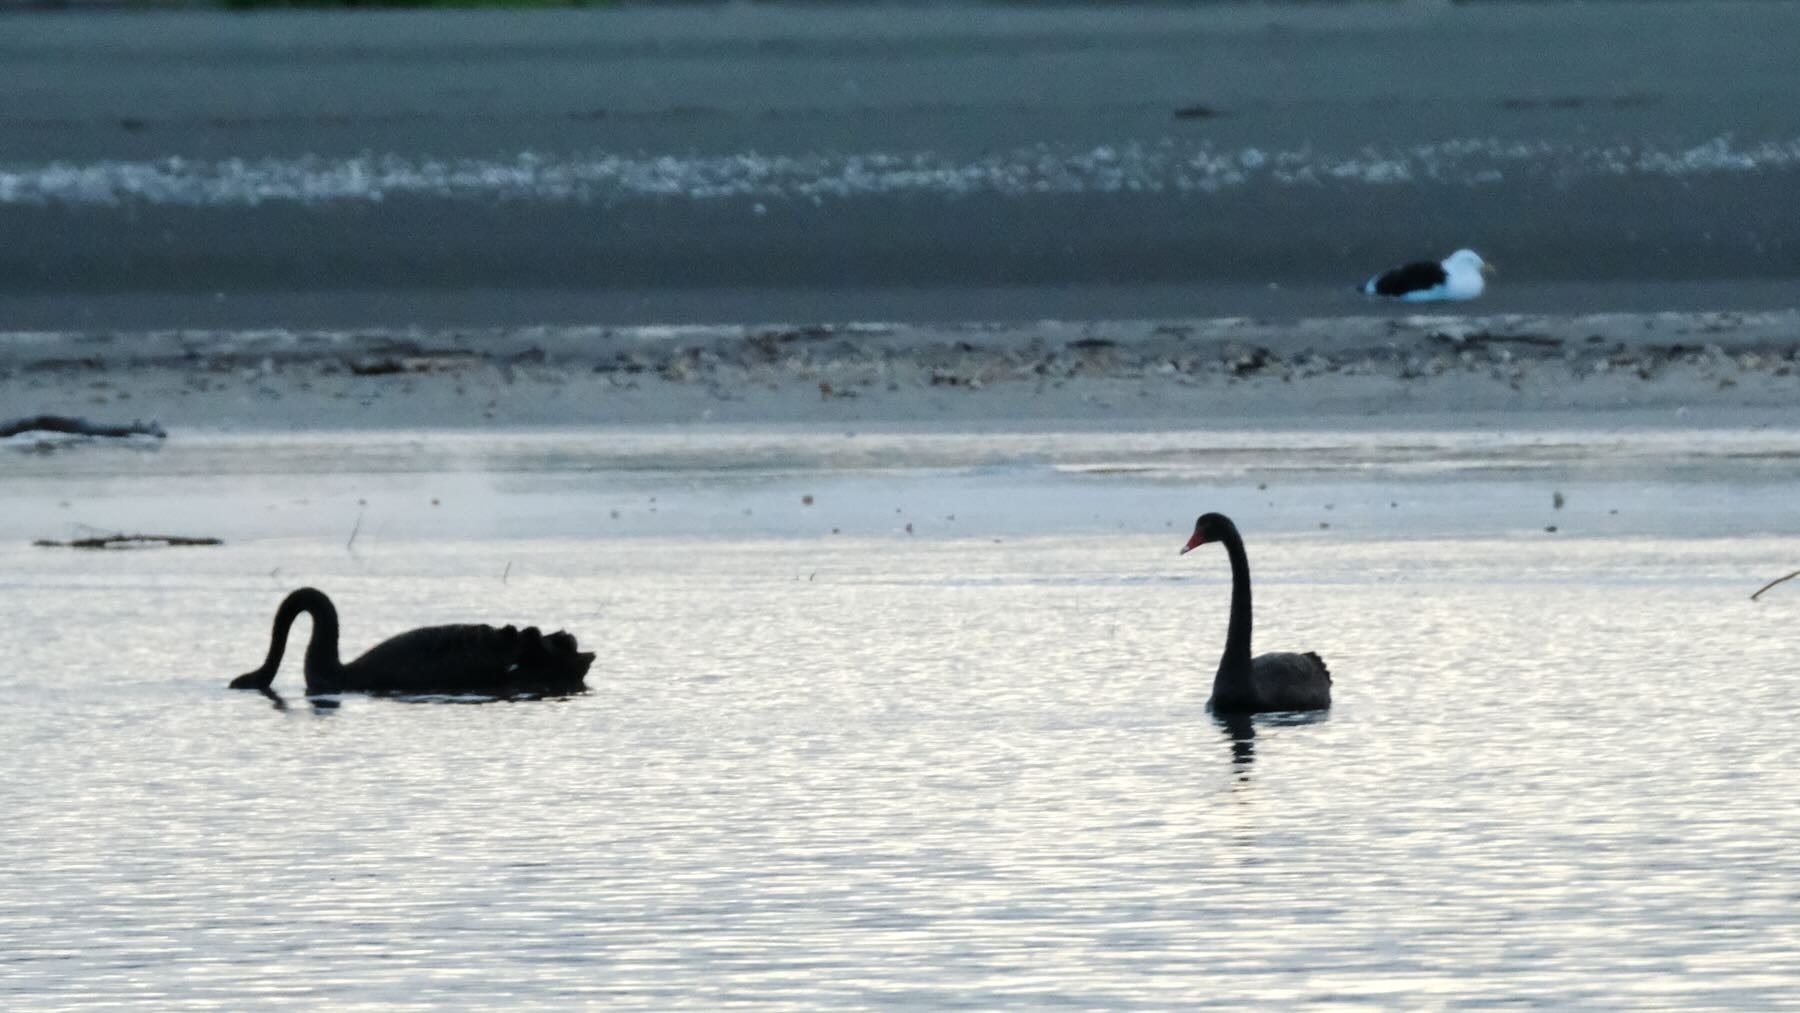 Two black swans on the estuary with a gull on the sand in the background.